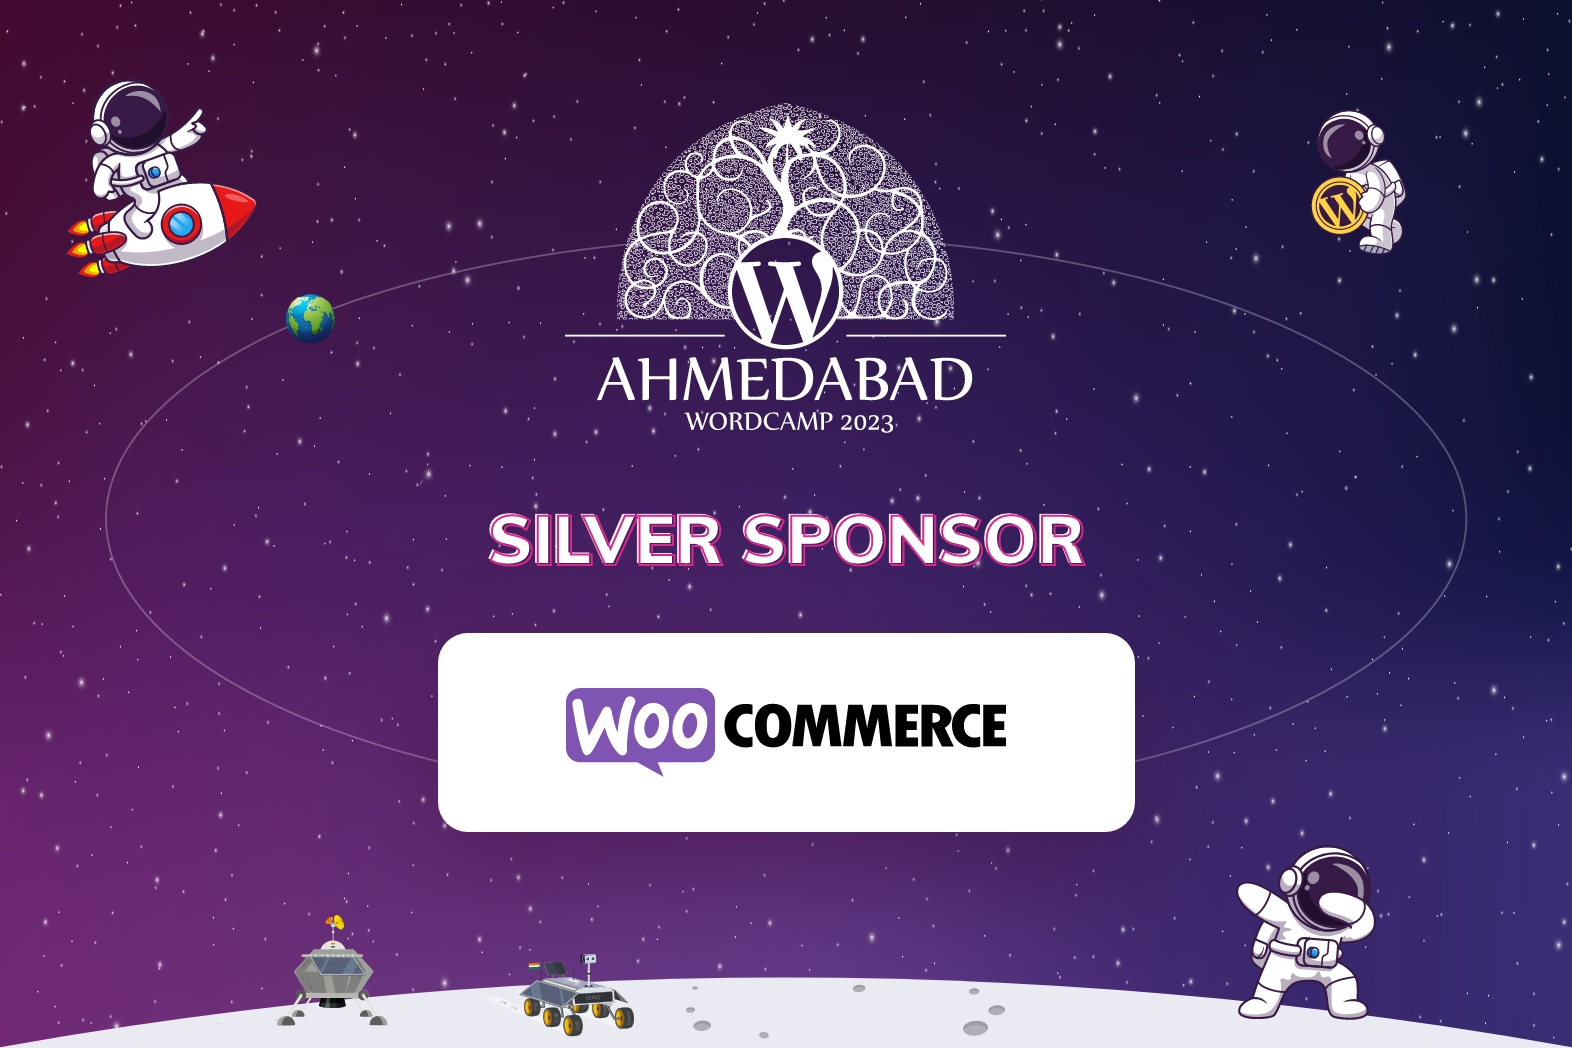 Thank You WooCommerce, for being our Silver Sponsor